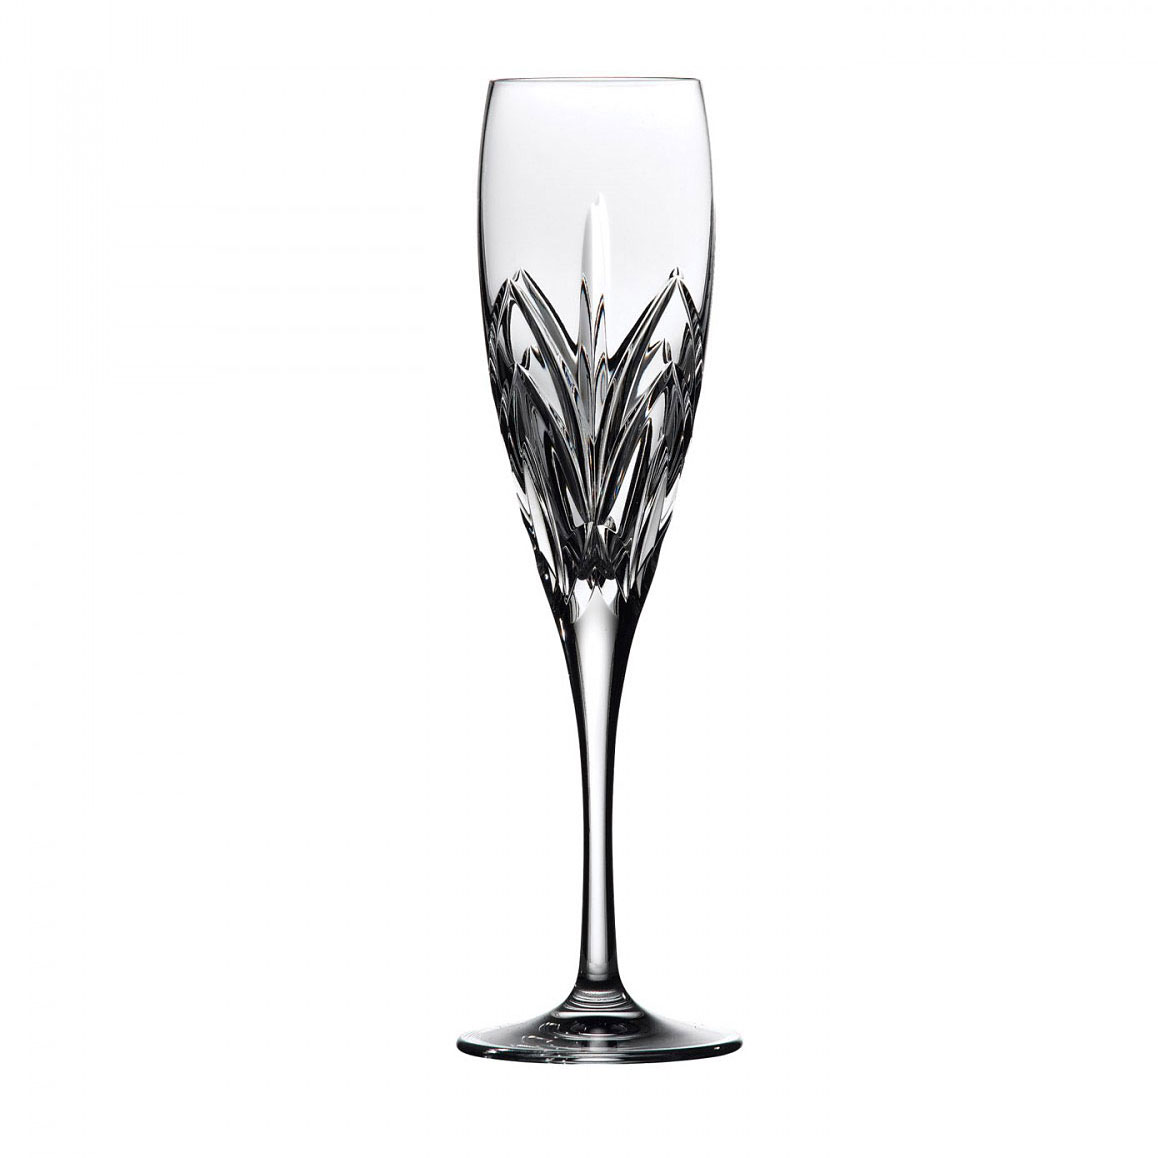 Marquis by Waterford Crystal, Caprice Crystal Flute, Single